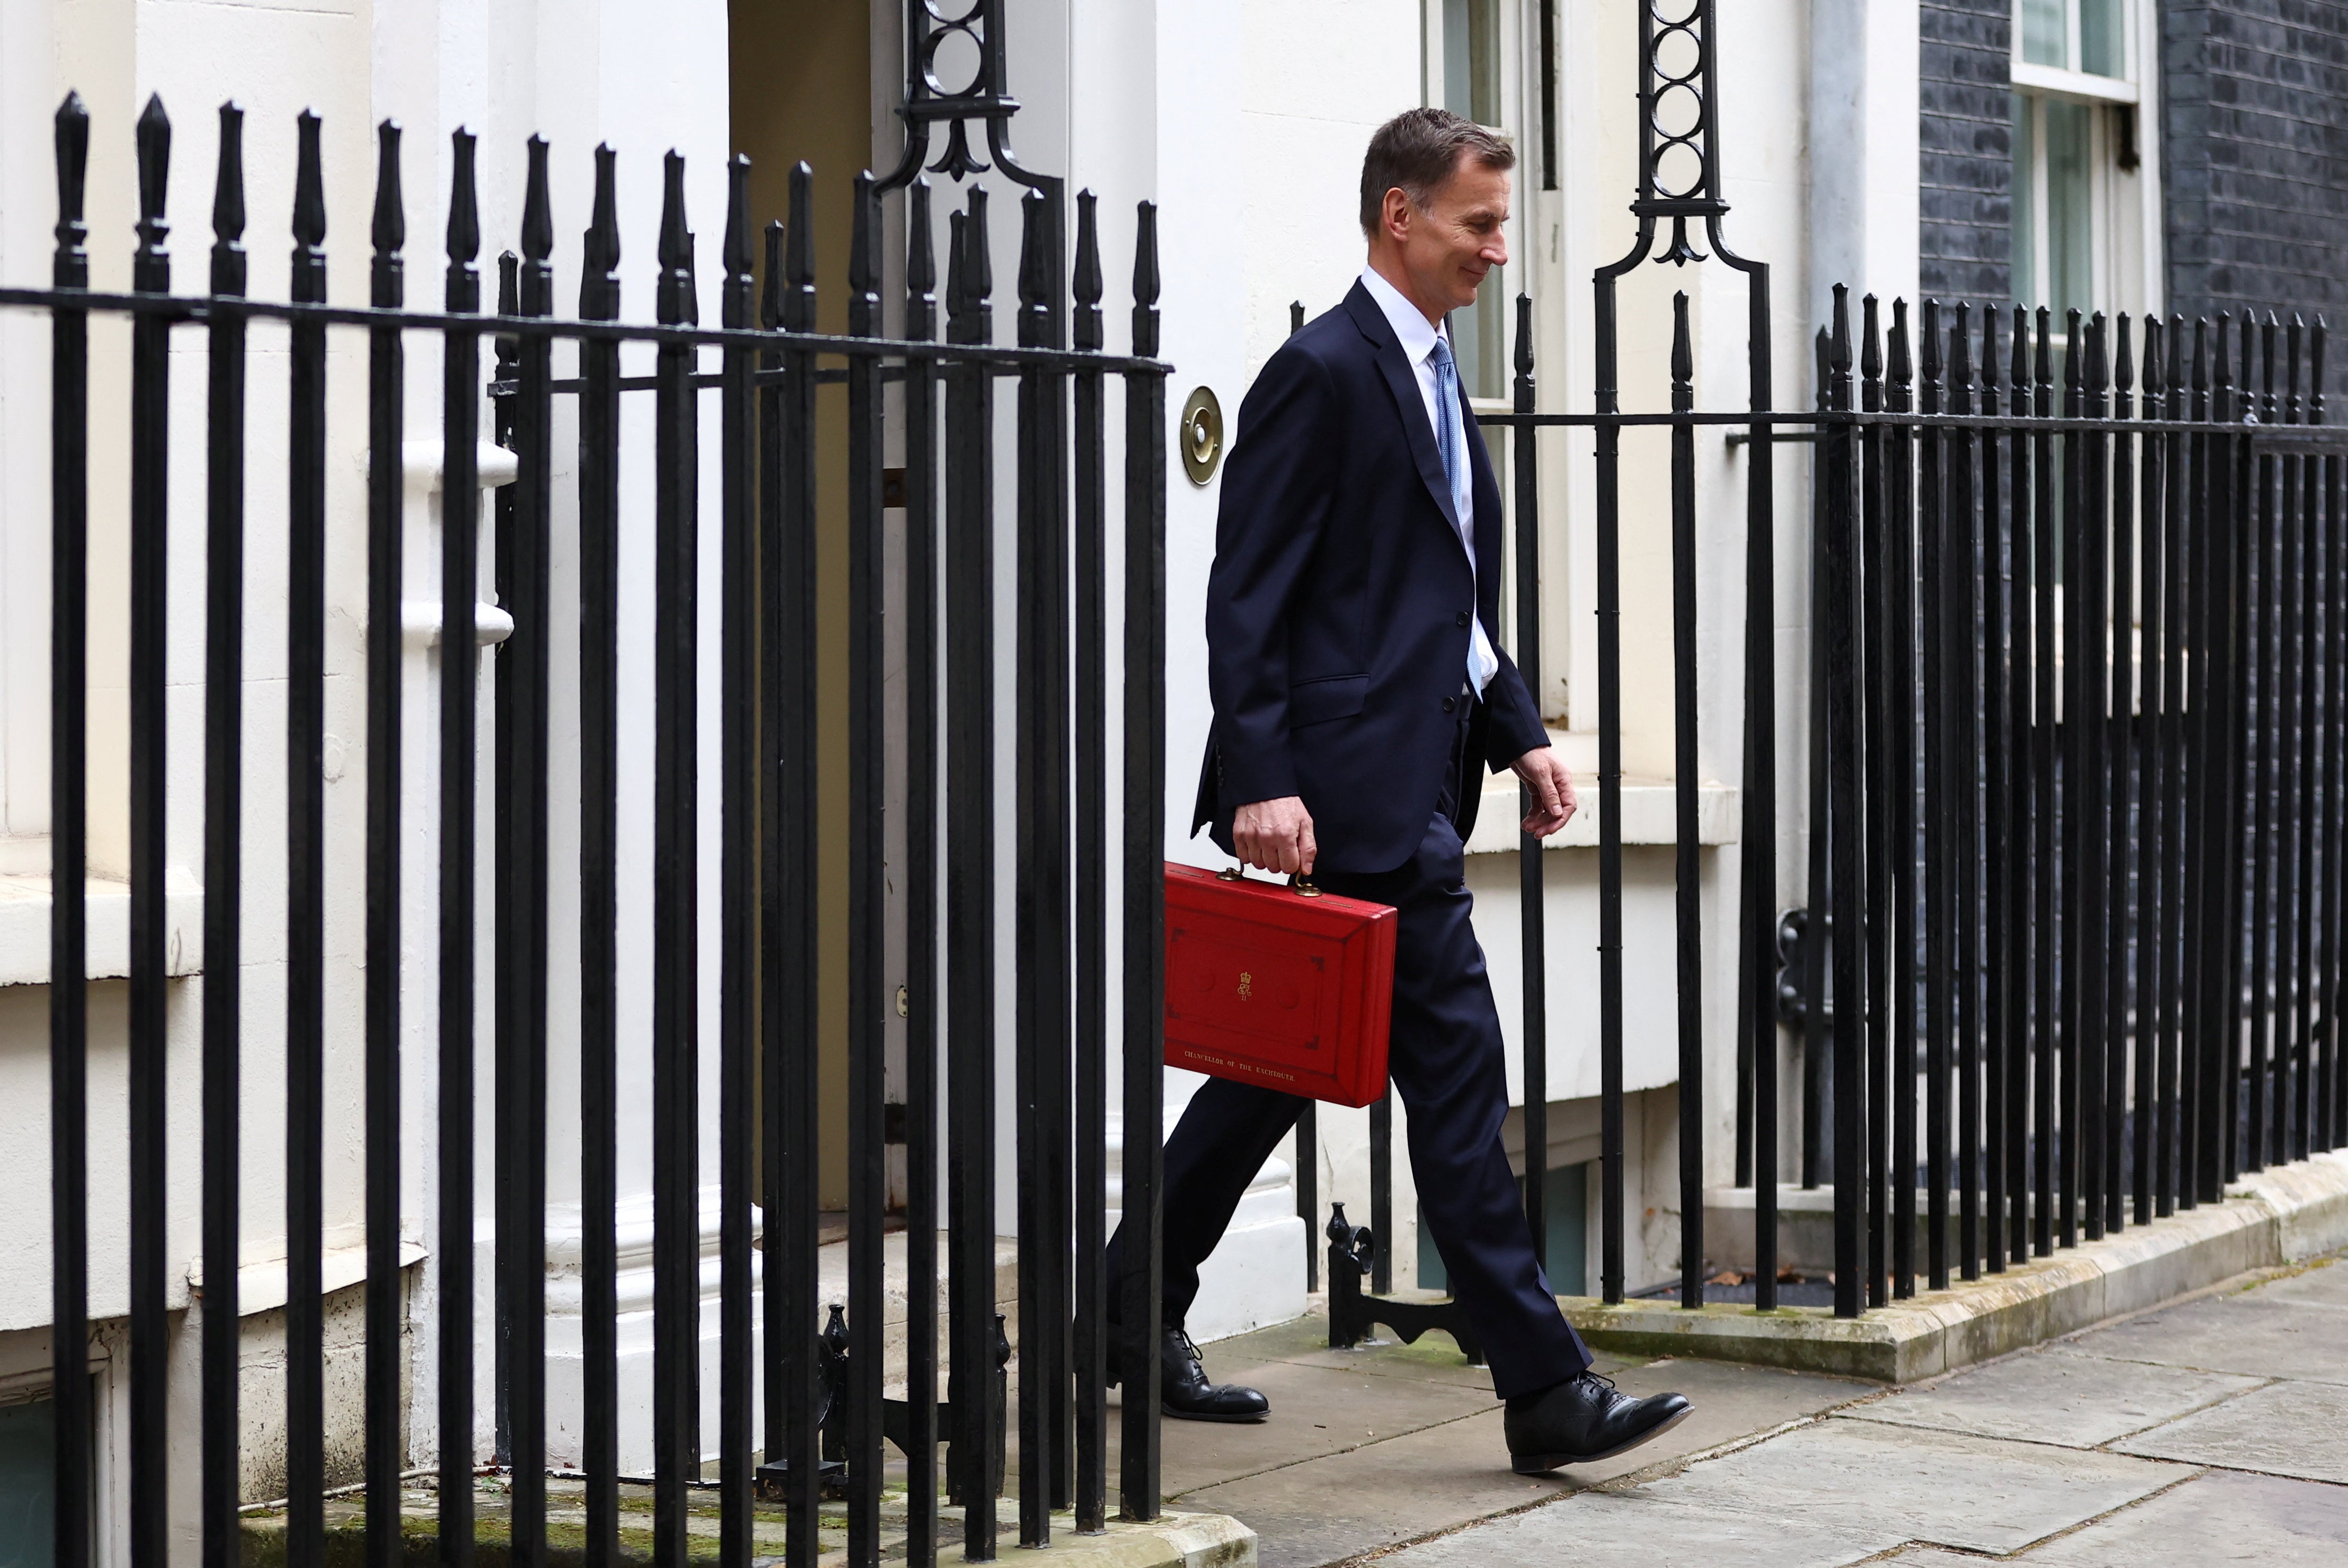 The chancellor stands to make a minimal gain in terms of the public finances but will still suffer maximum political fallout